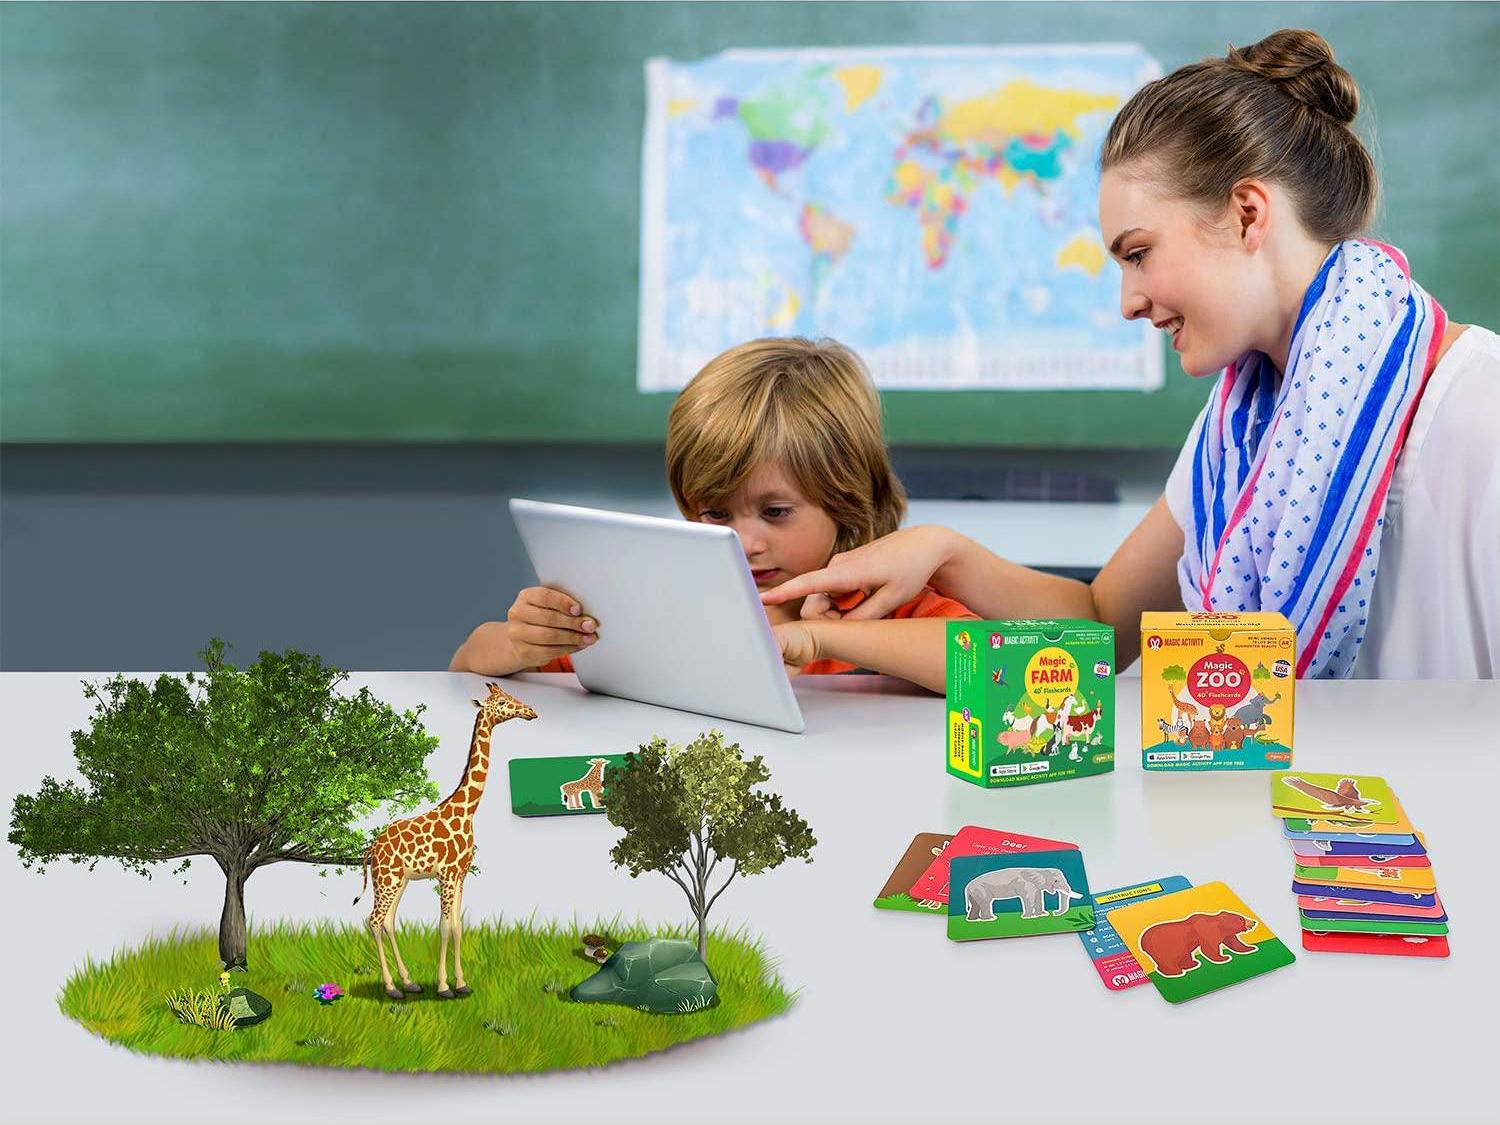 Magic Activity, Magic Zoo 4D Flash Cards for Kids: Animals Come Alive (See Them Walk, Talk, Run and Eat) with Augmented Reality - 26 Interactive Learning Flash Cards (AR App Included)